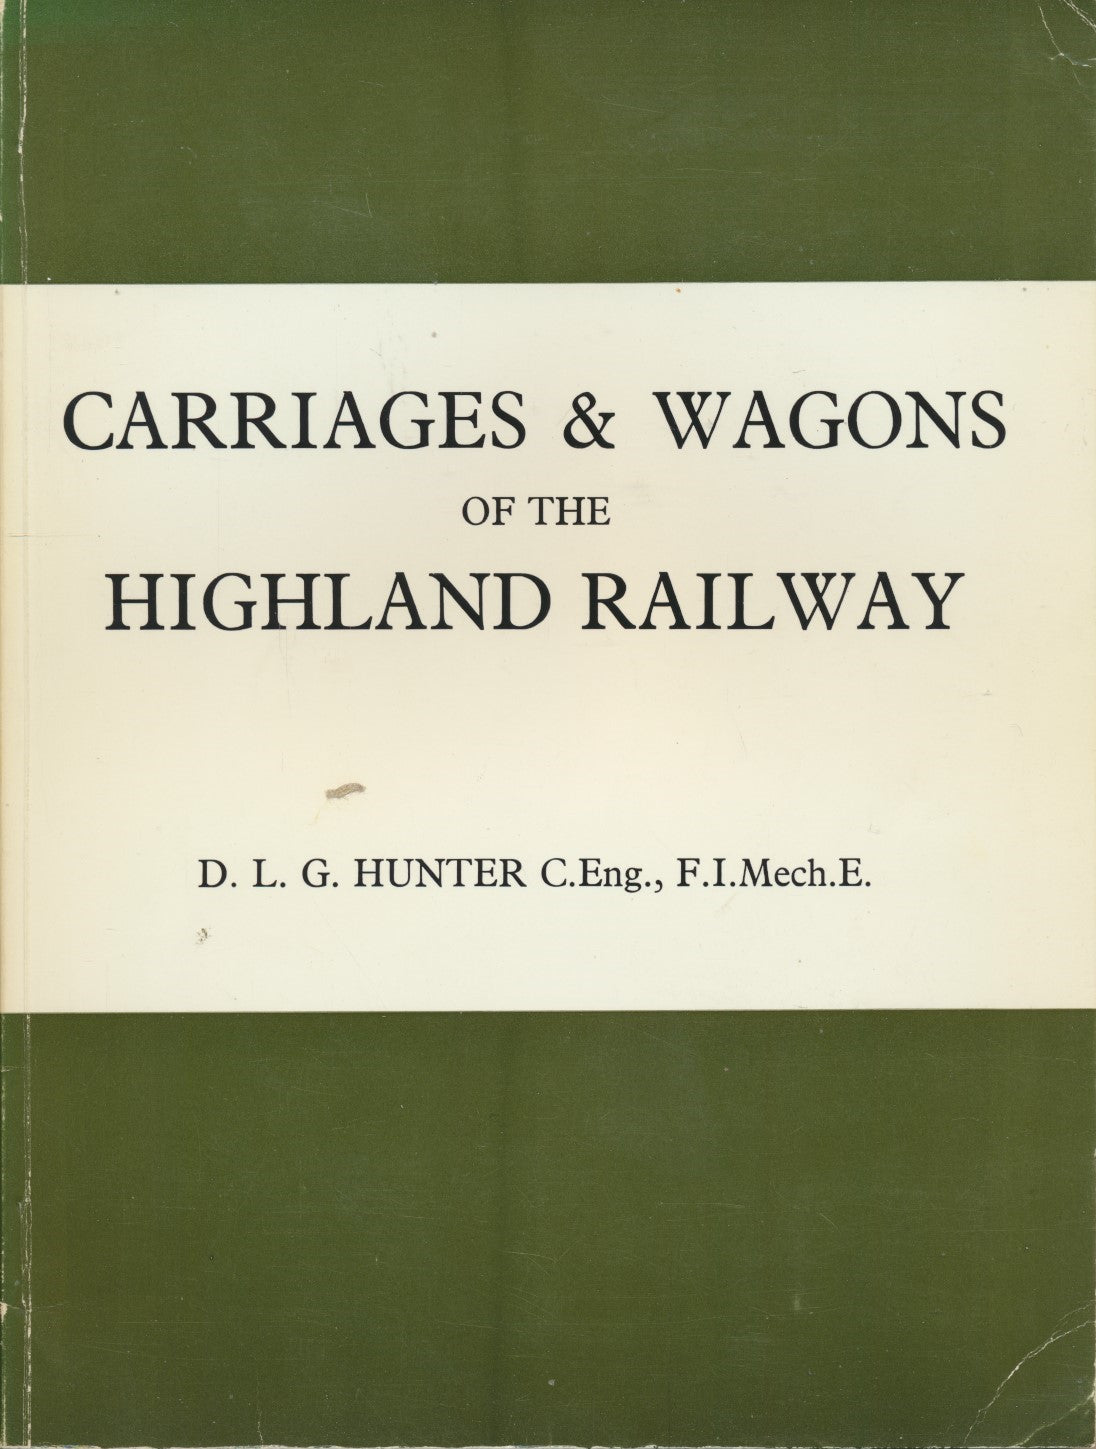 Carriages and Wagons of the Highland Railway